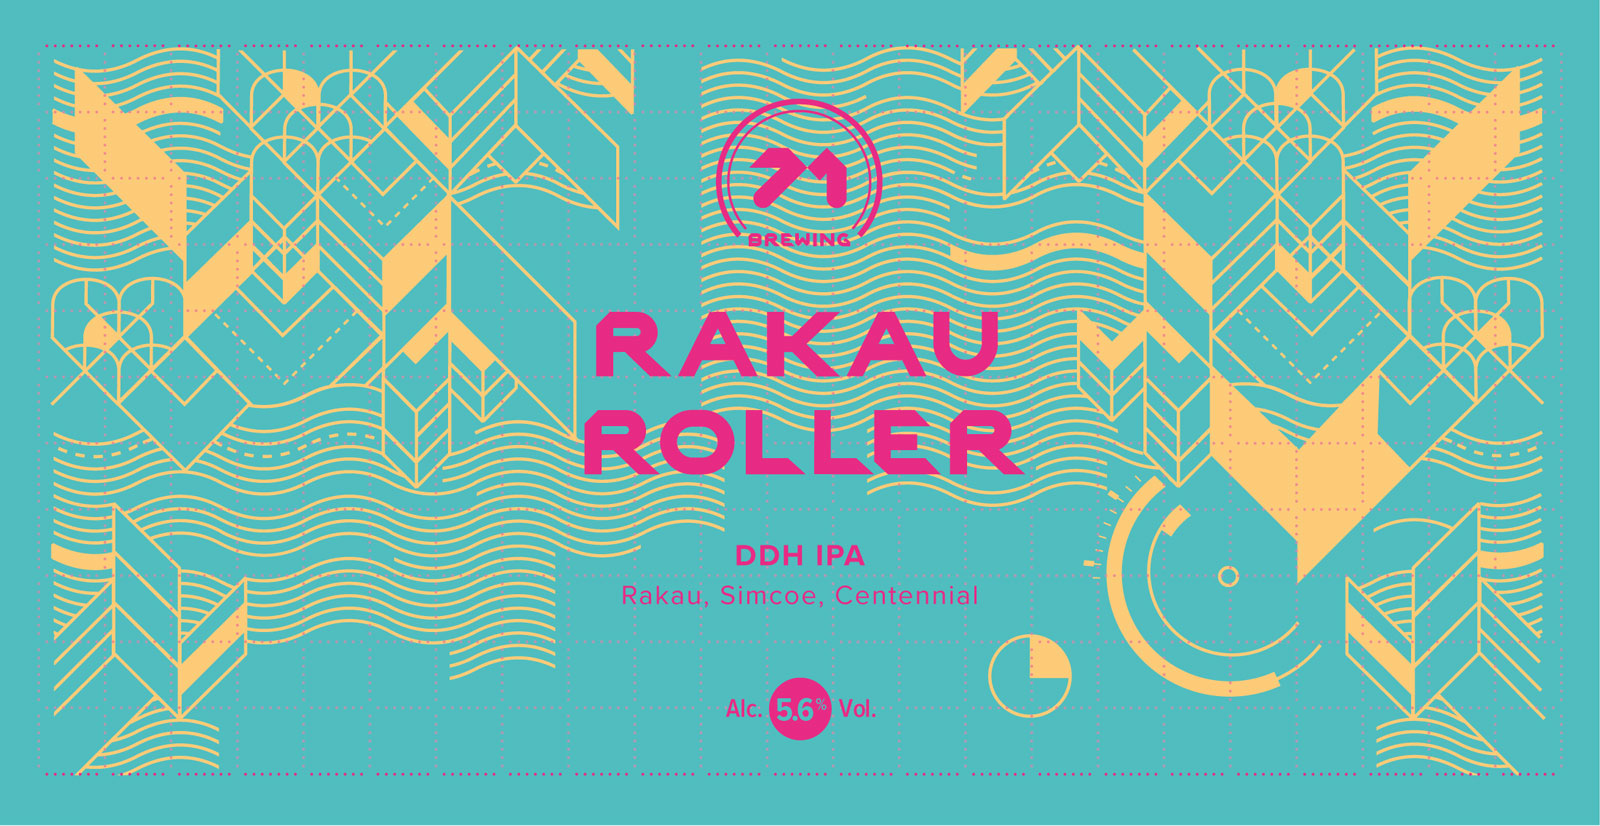 Label for Rakau Roller a DDH IPA. Vibrant pink logo and typography ontop of an amber geometric pattern and soft teal background.